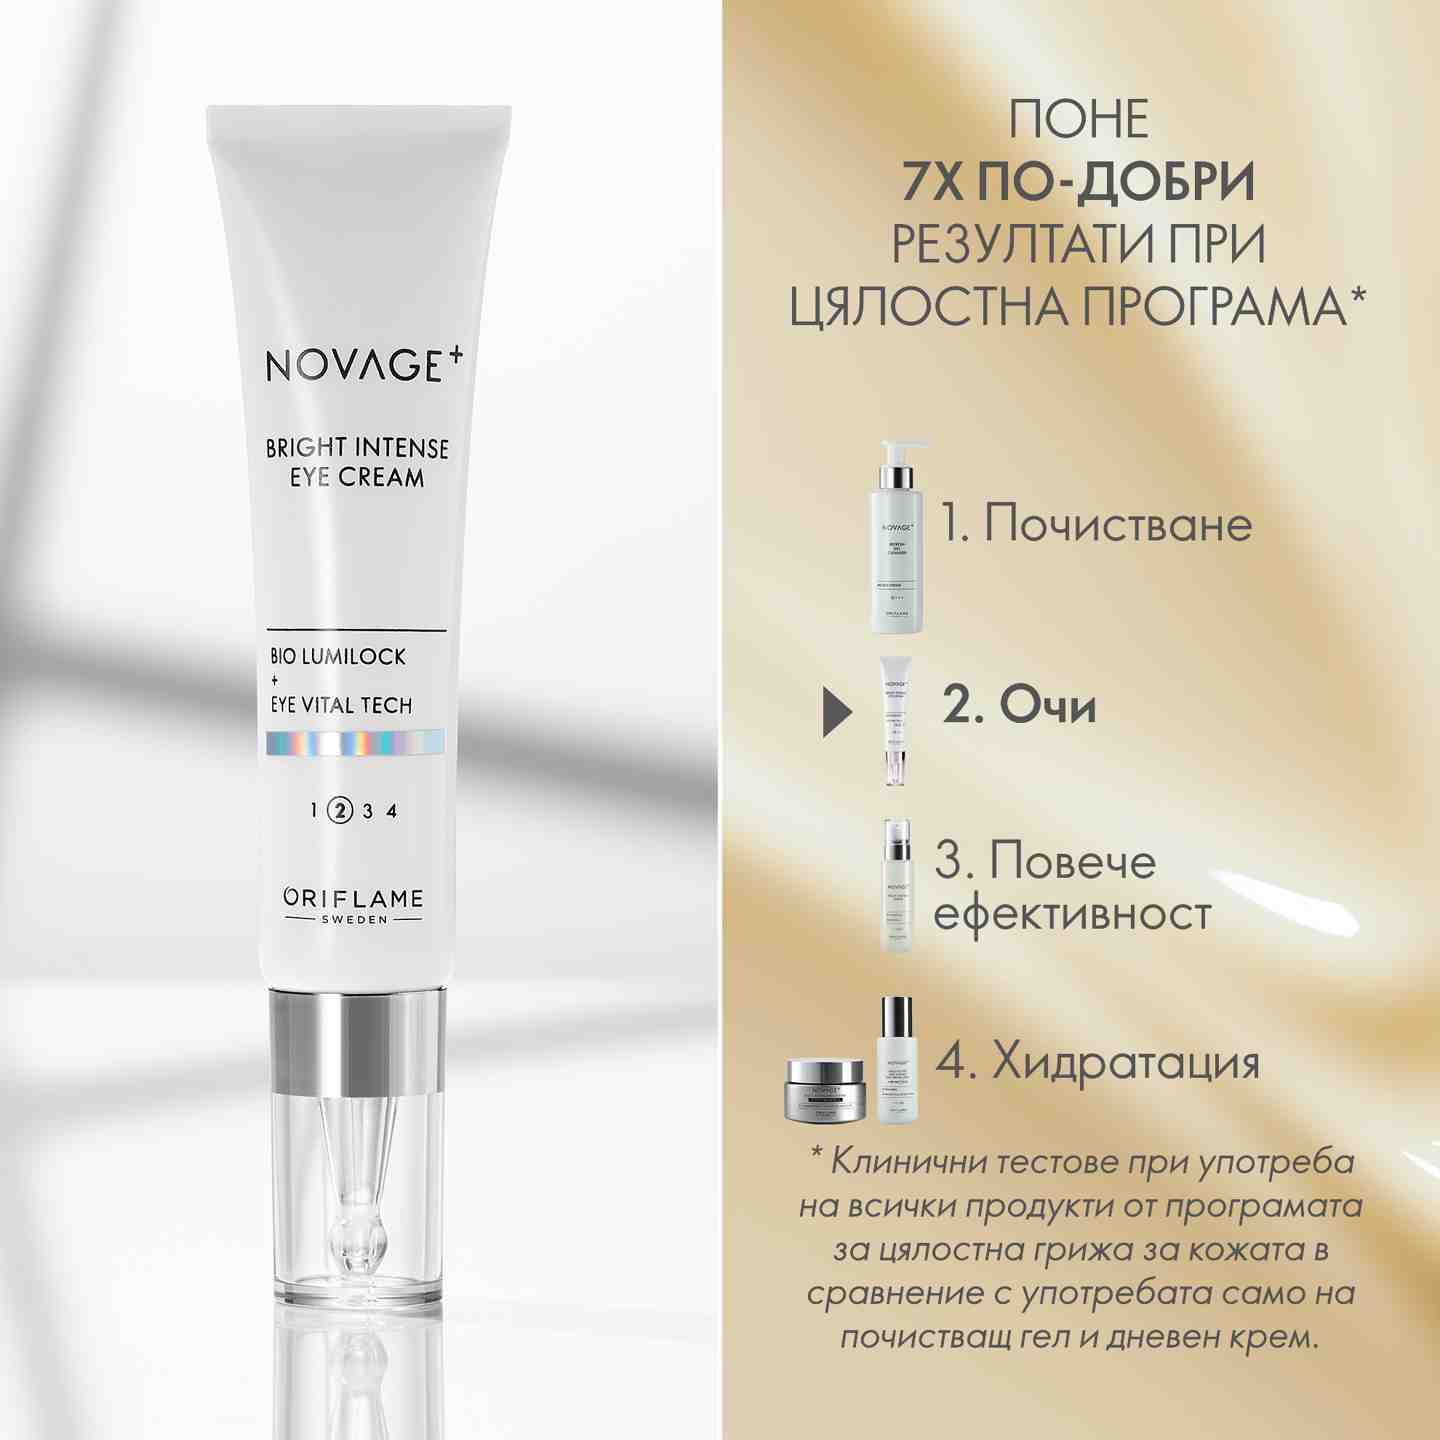 https://media-cdn.oriflame.com/productImage?externalMediaId=product-management-media%2fProducts%2f41033%2fBG%2f41033_5.png&id=17554549&version=1